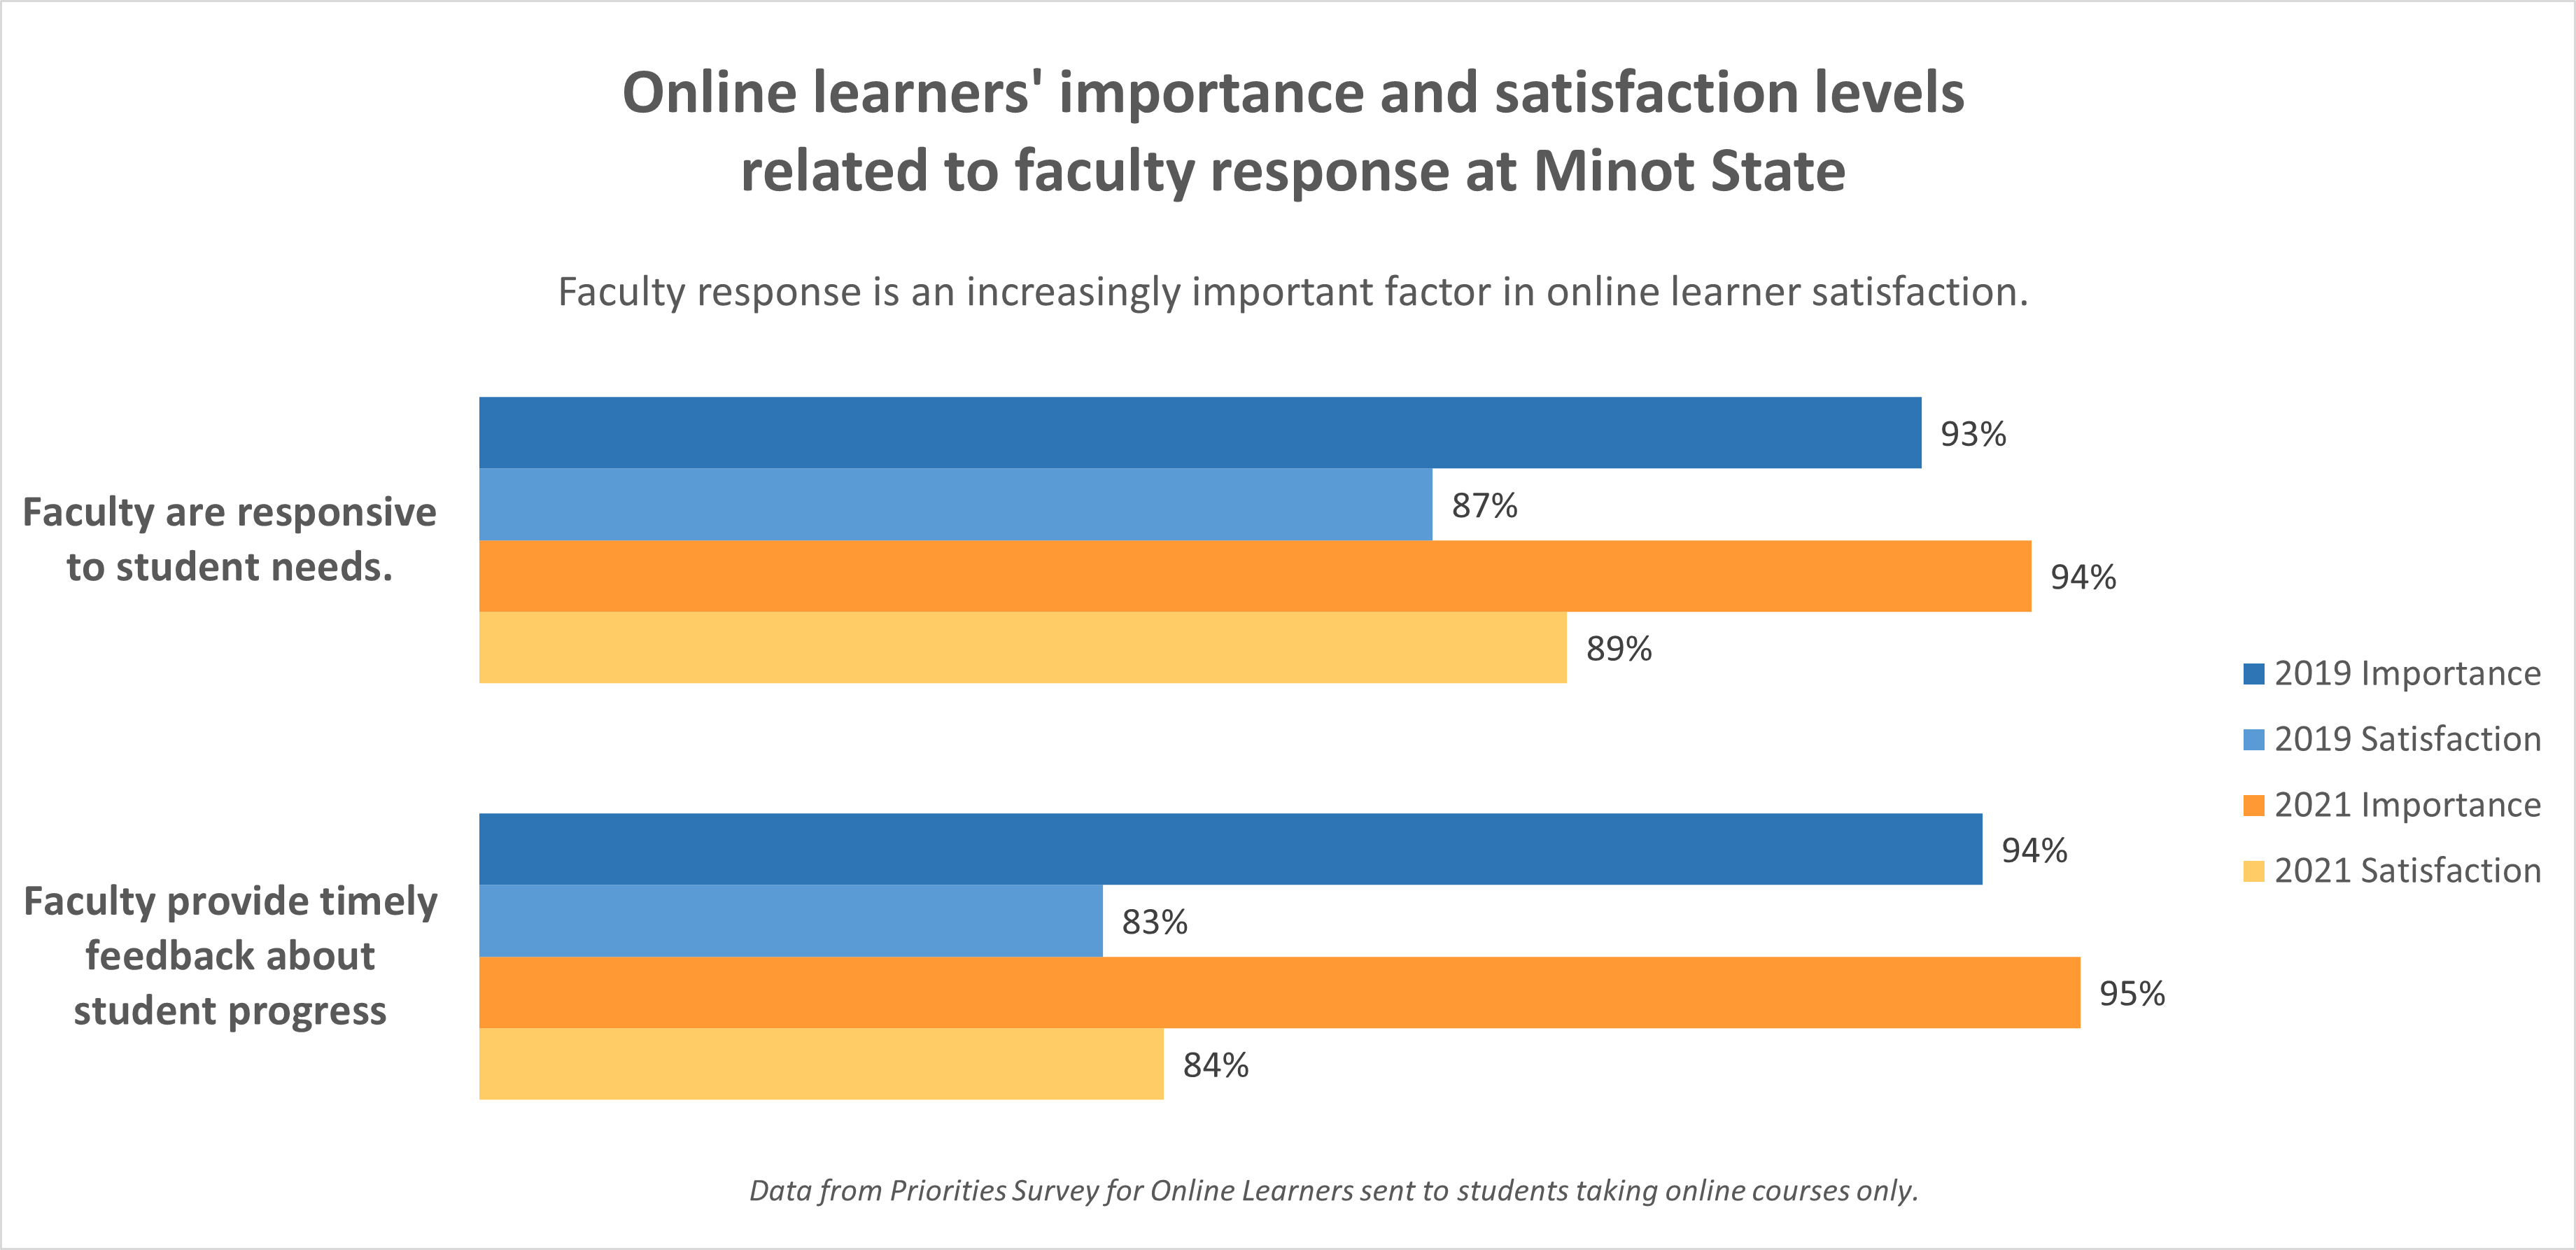 Data from the Priorities Survey for Online Learners in 2019 and 2021 show that faculty response is an increasingly important factor in online learner satisfaction.